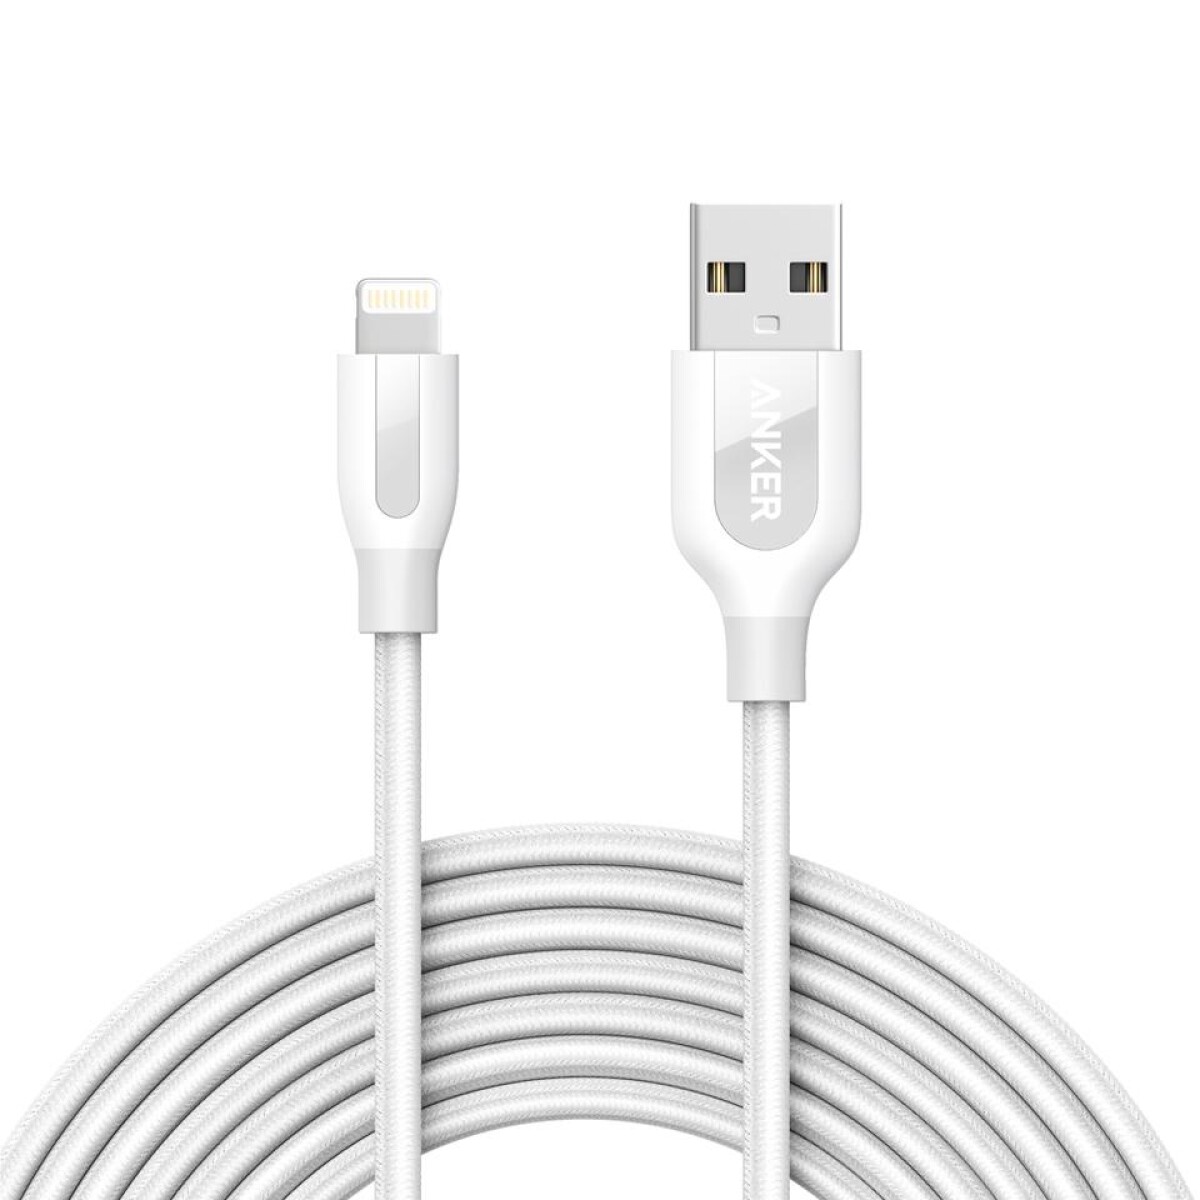 ANKER POWERLINE+ CABLE BRAIDED WITH LIGHTNING CONNECTOR 3FT 0.9M - ANKER POWERLINE+ CABLE BRAIDED WITH LIGHTNING CONNECTOR 3FT 0.9M WH 